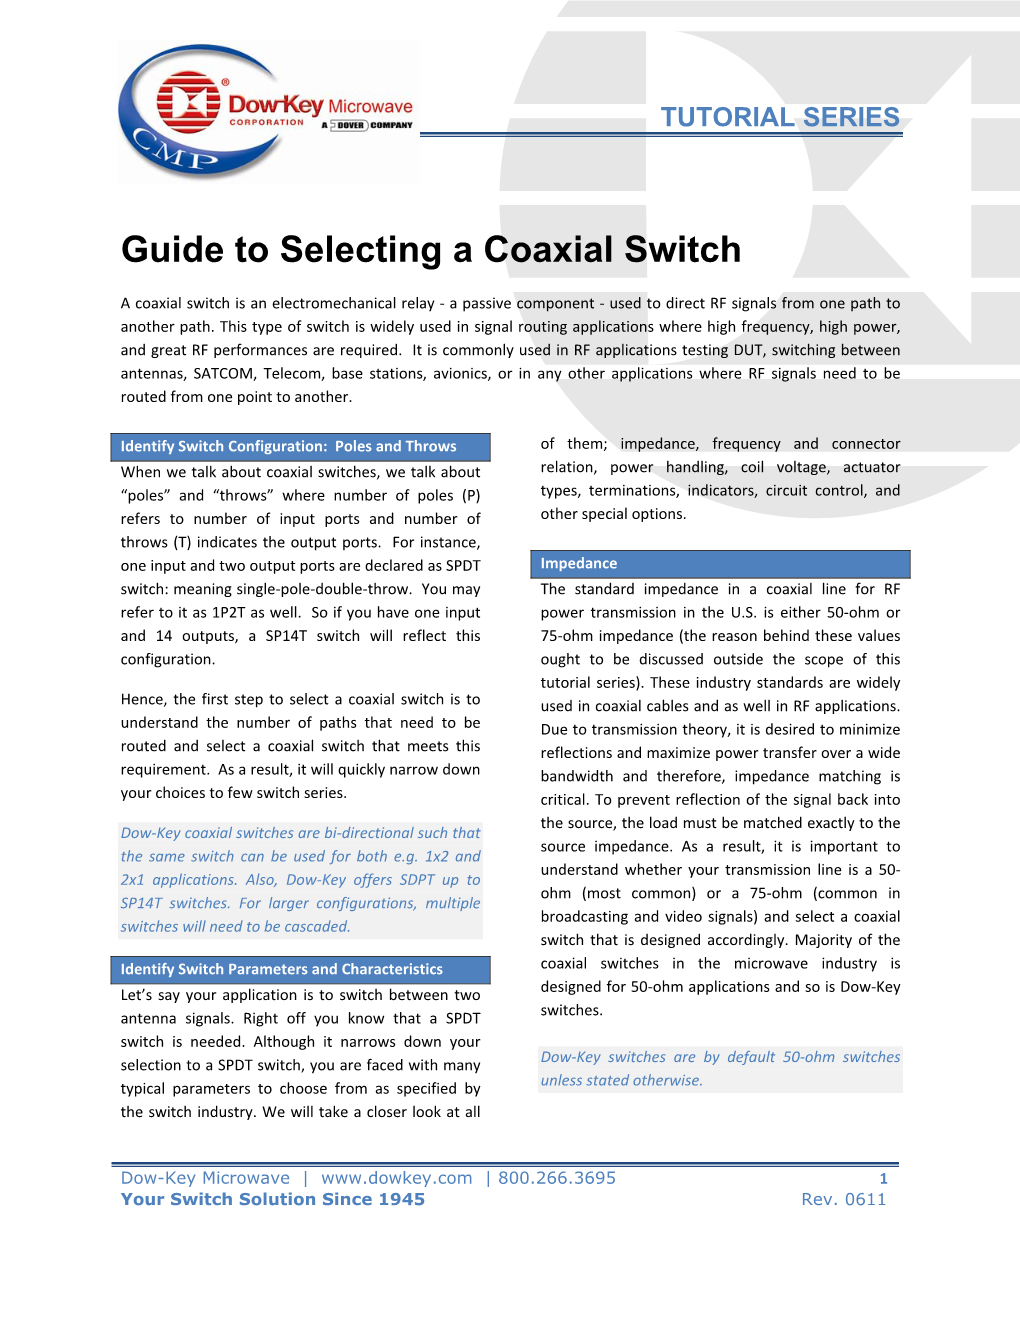 Guide to Selecting a Coaxial Switch